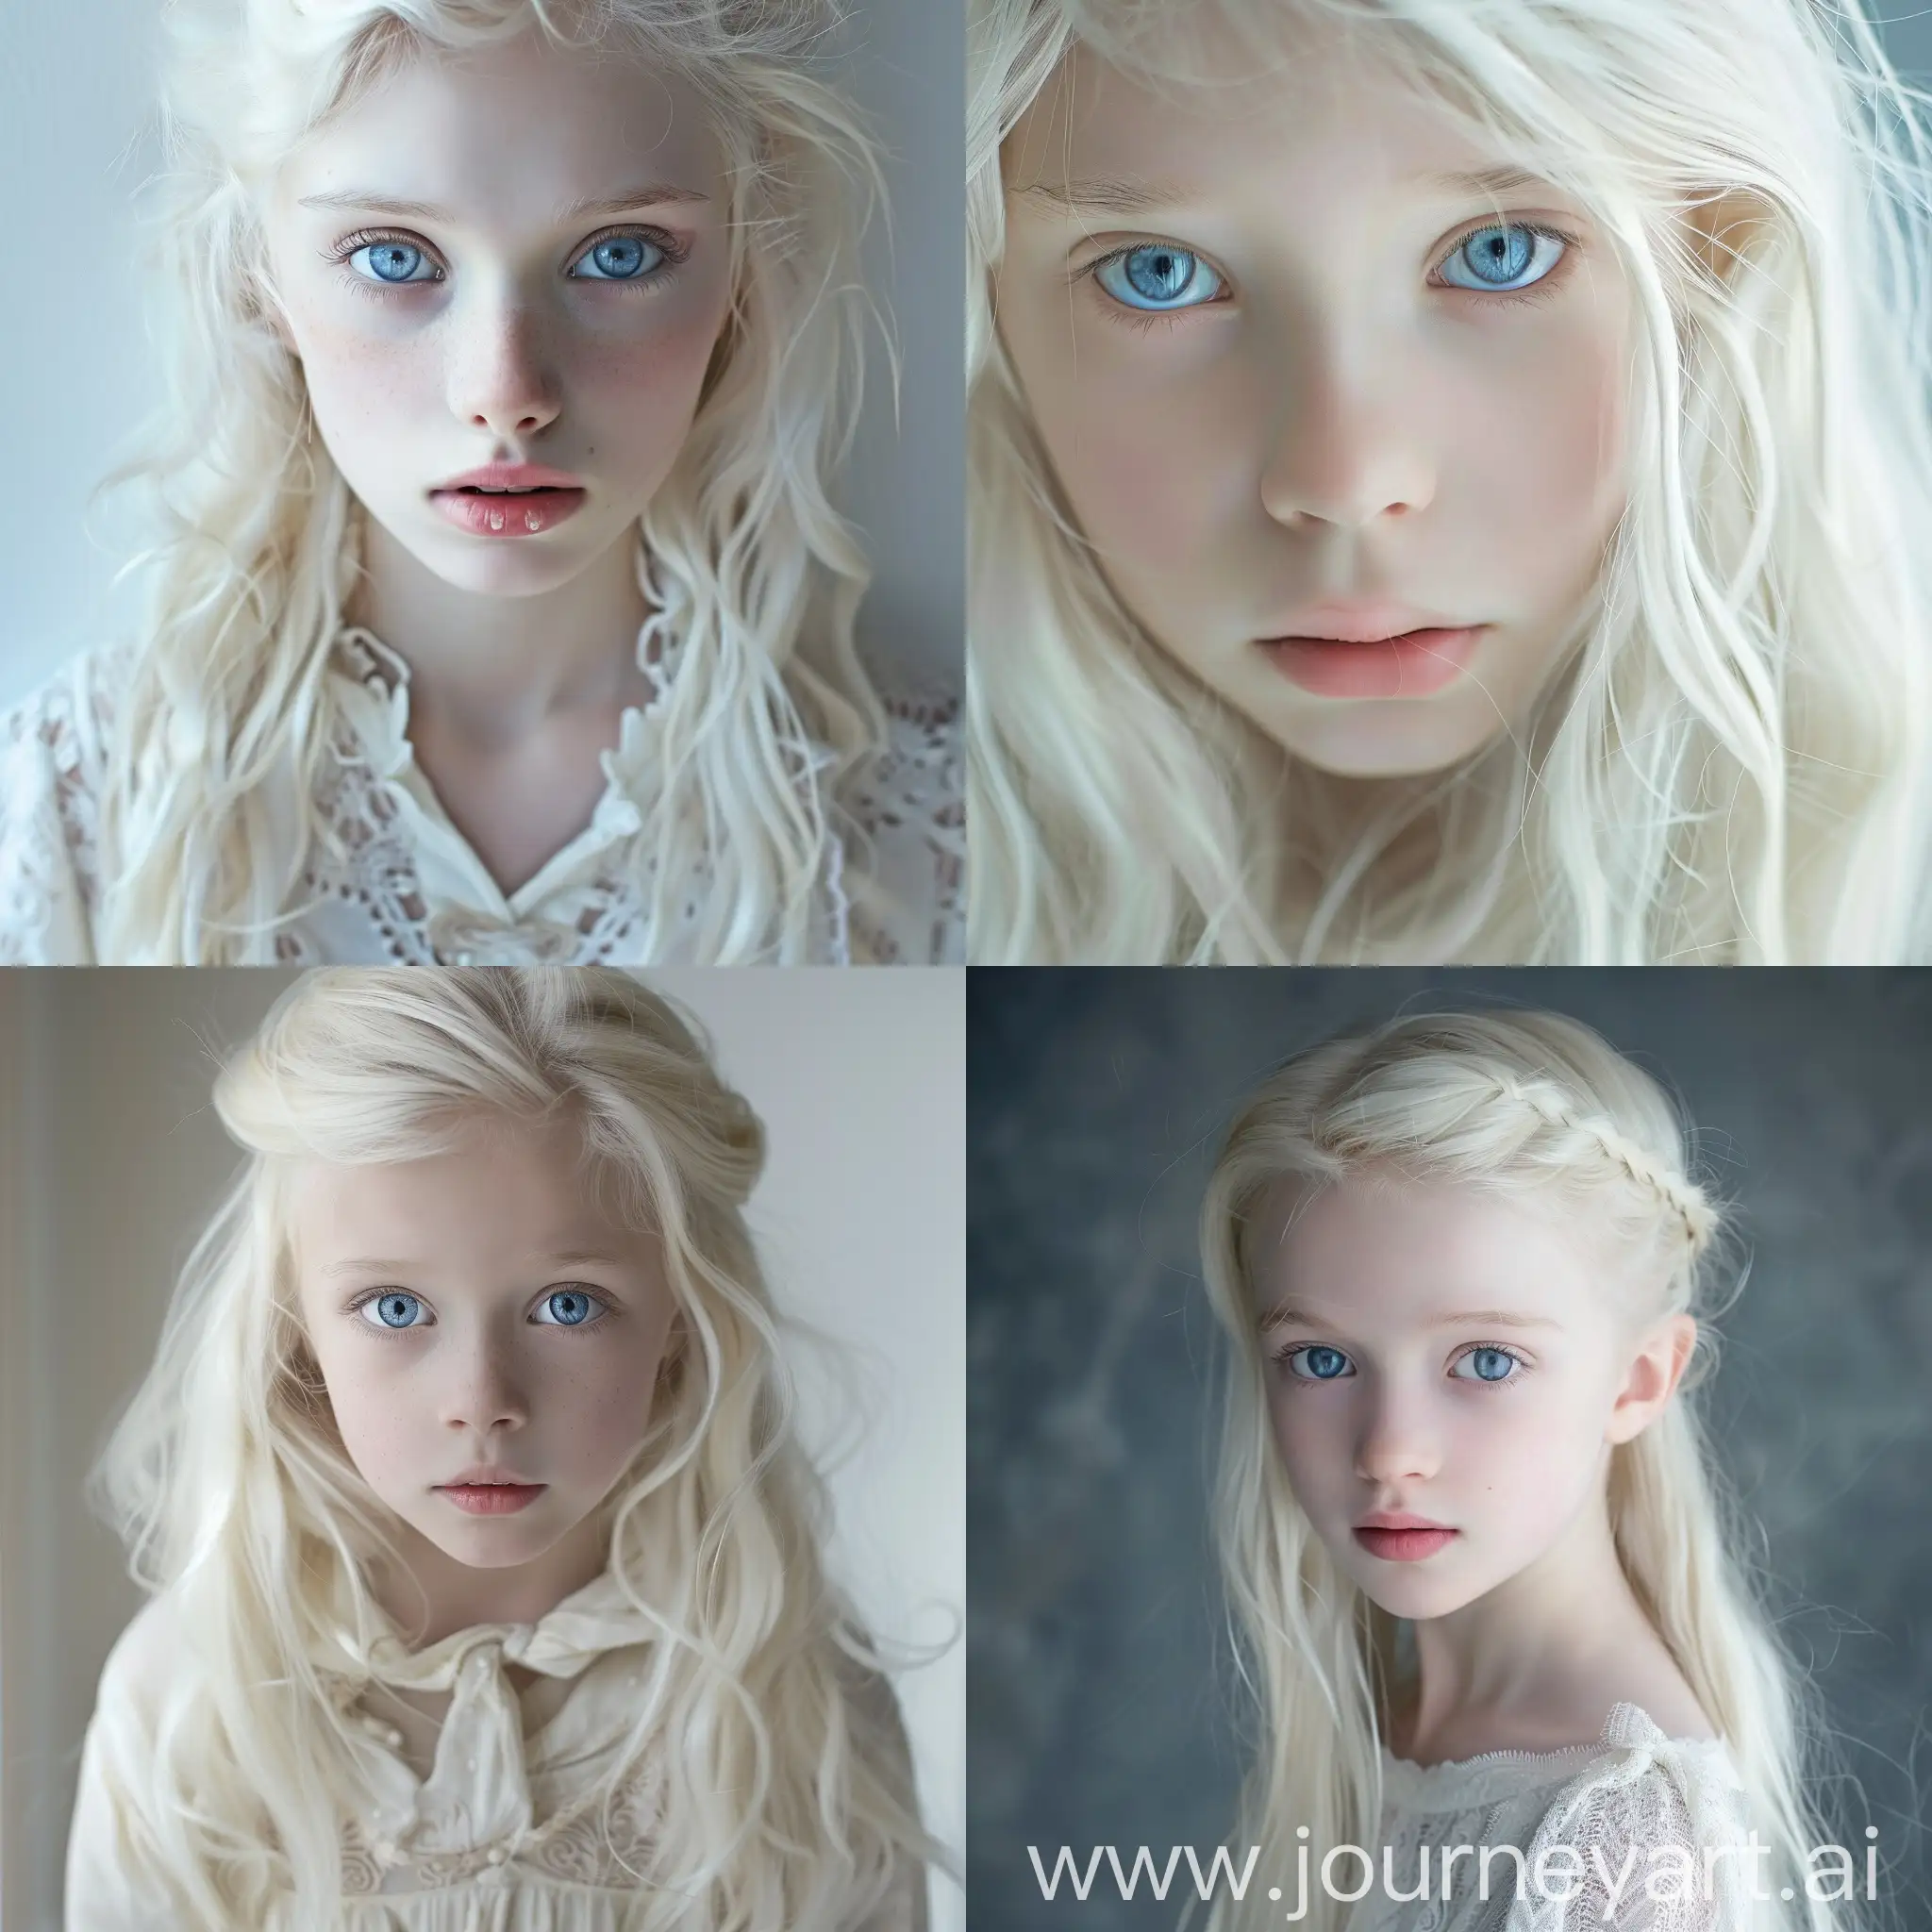 Stunning-Blonde-German-Girl-Portrait-with-Blue-Eyes-and-Fair-Complexion